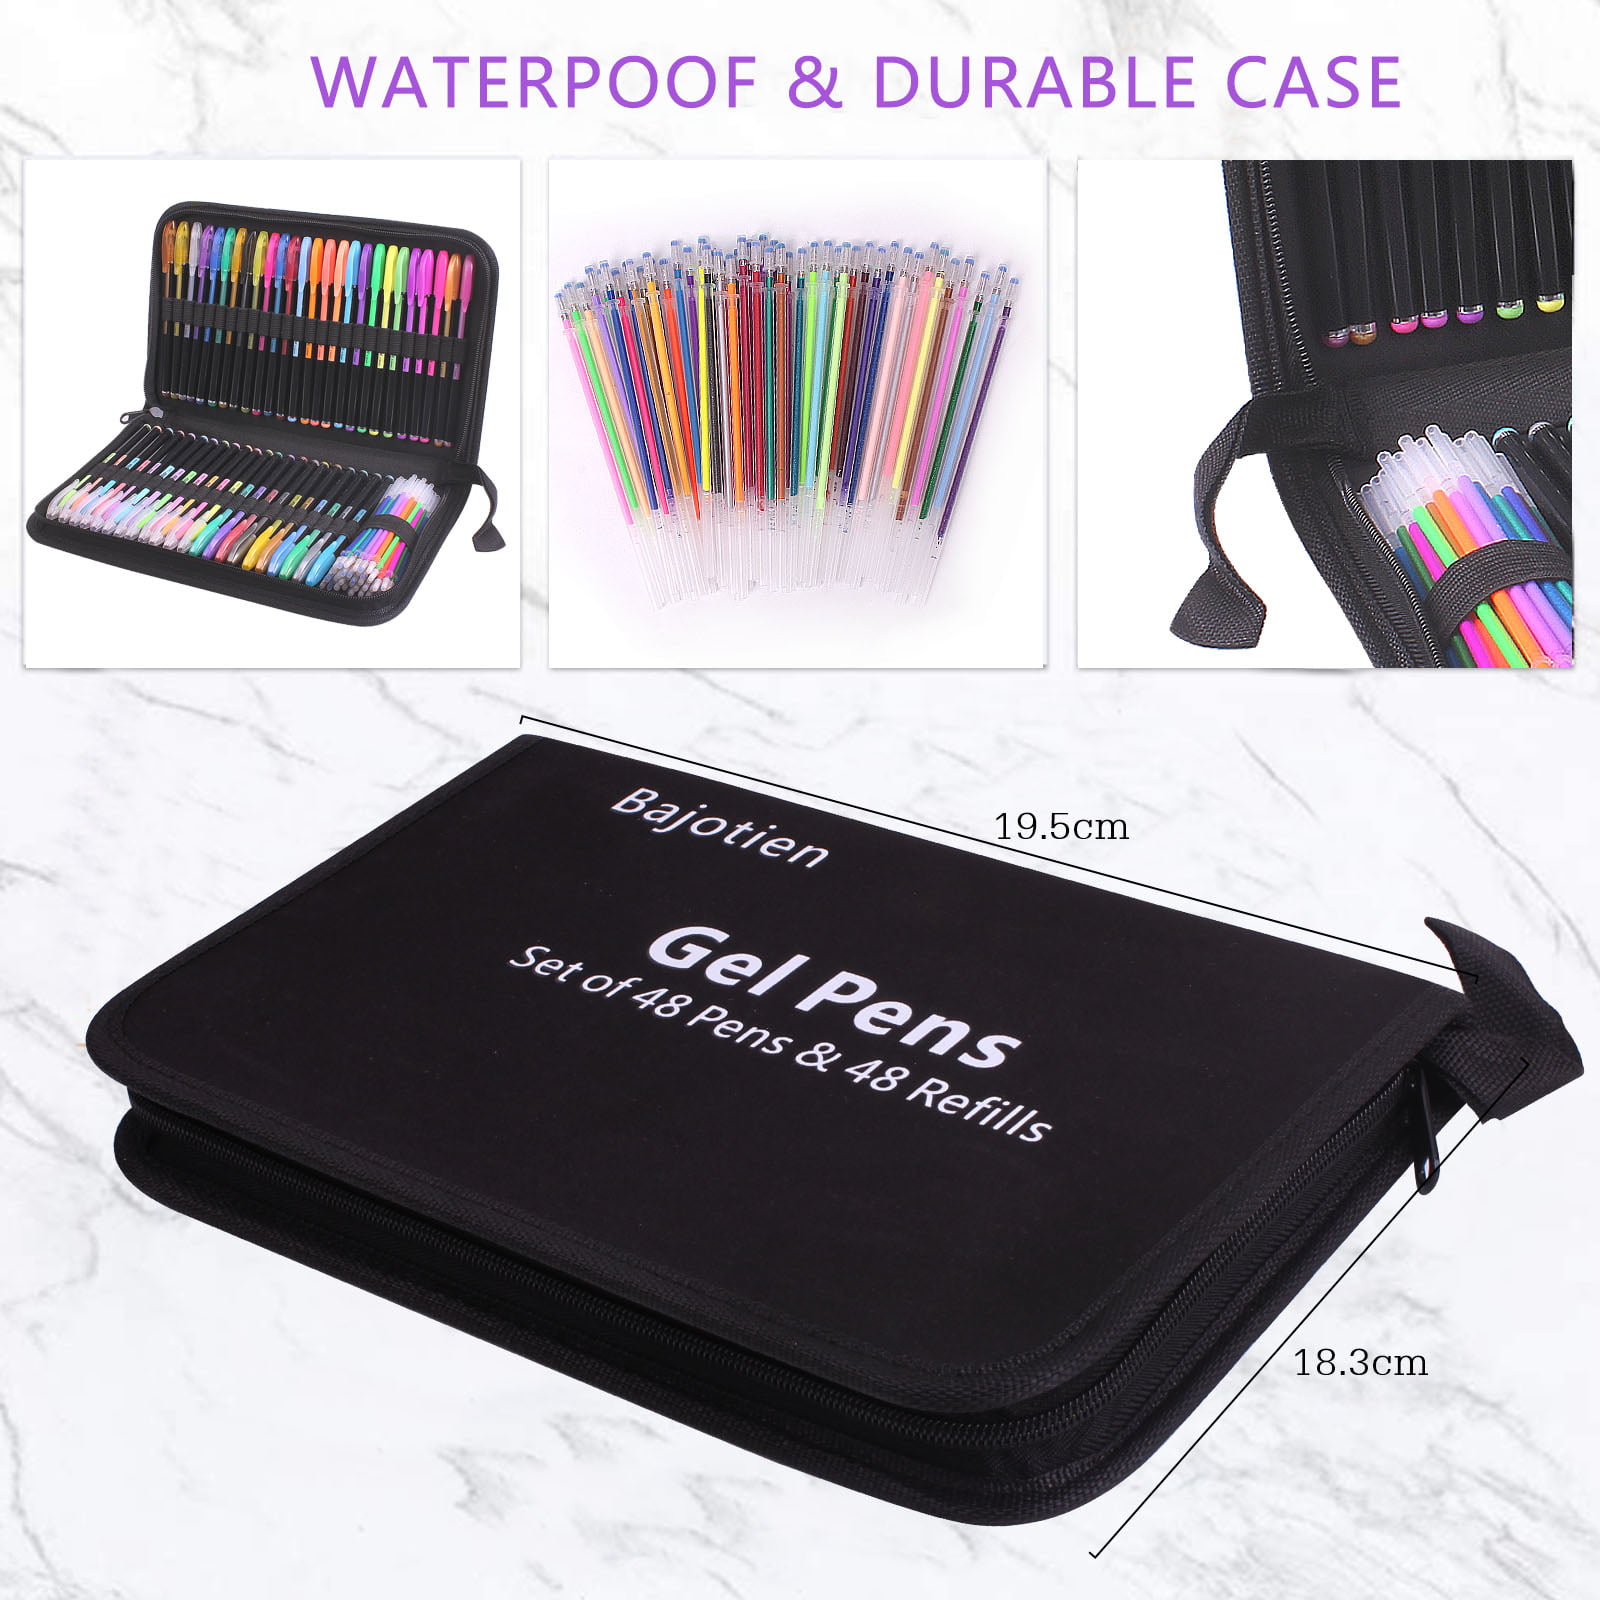 120 Carrying Case(60 Color Gel Pens and 60 ink Refills), 0.8-1MM